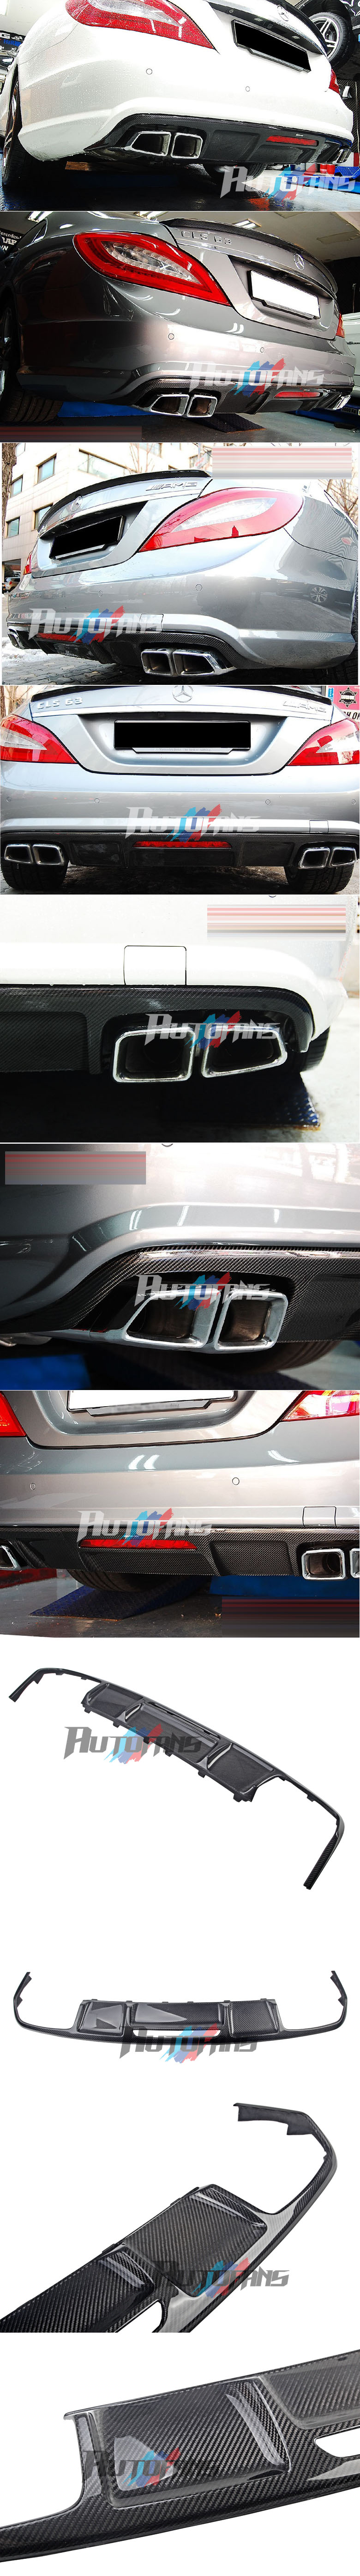 BENZ W218 CLS63 OE STYLE CARBON FIBER REAR DIFFUSER